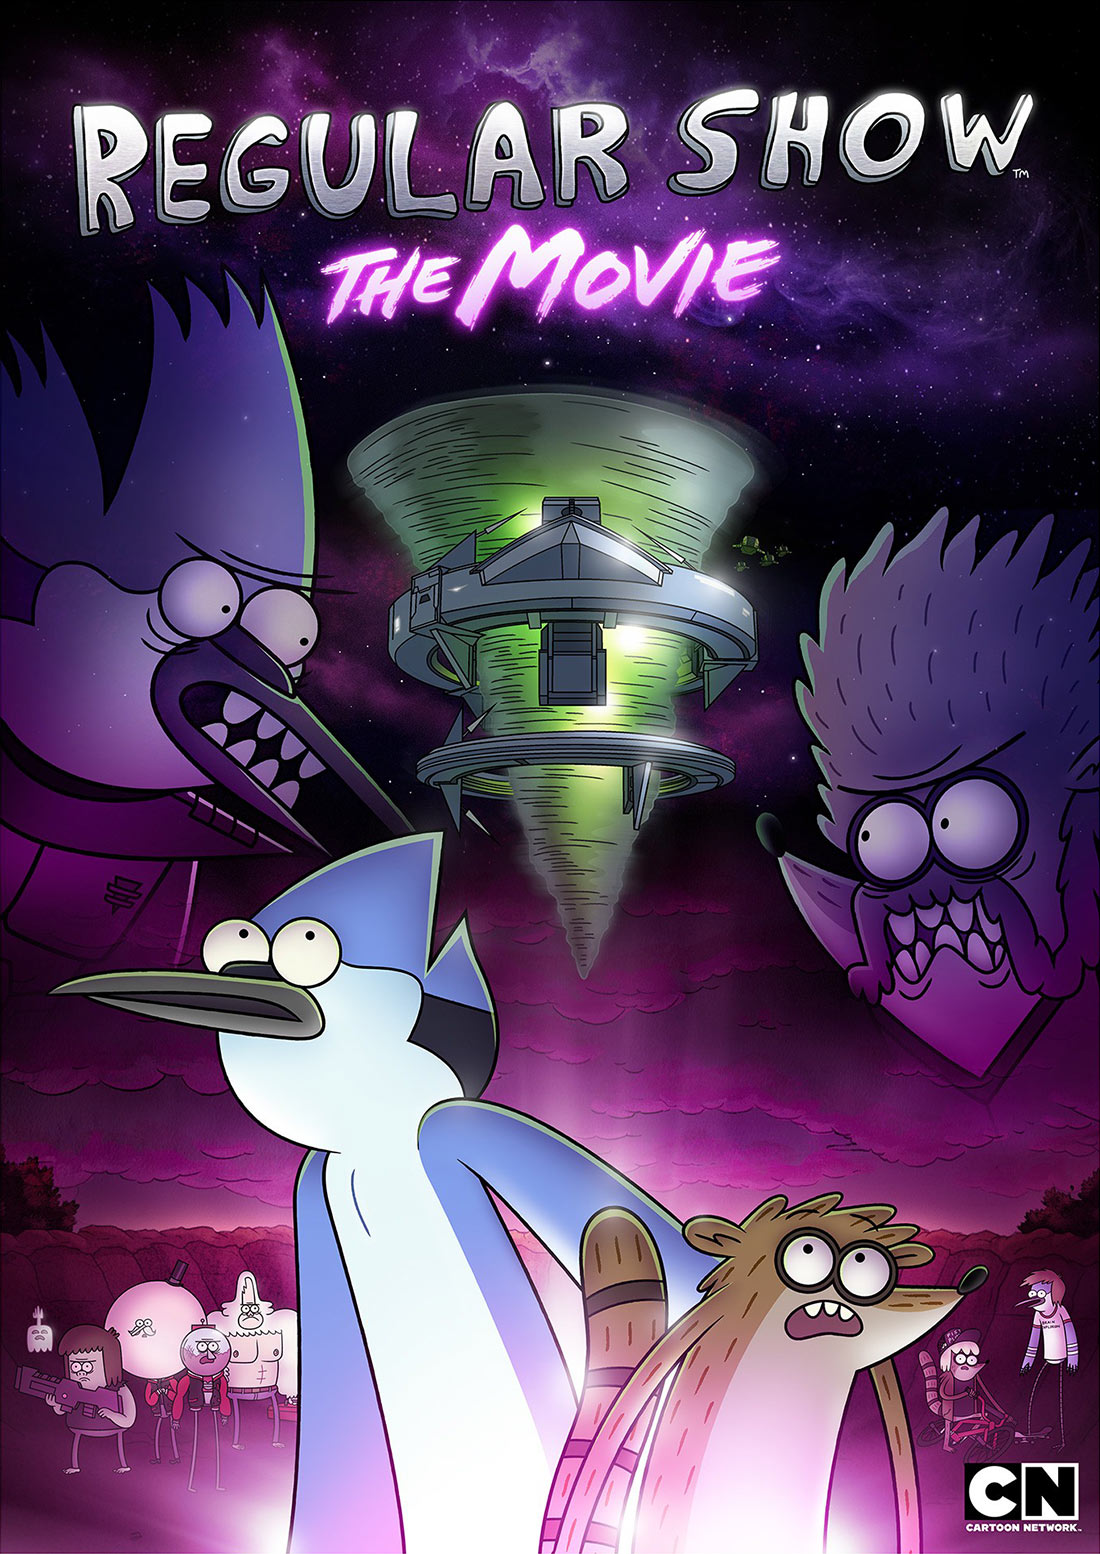 "Regular Show: The Movie" poster. (Click to enlarge.)